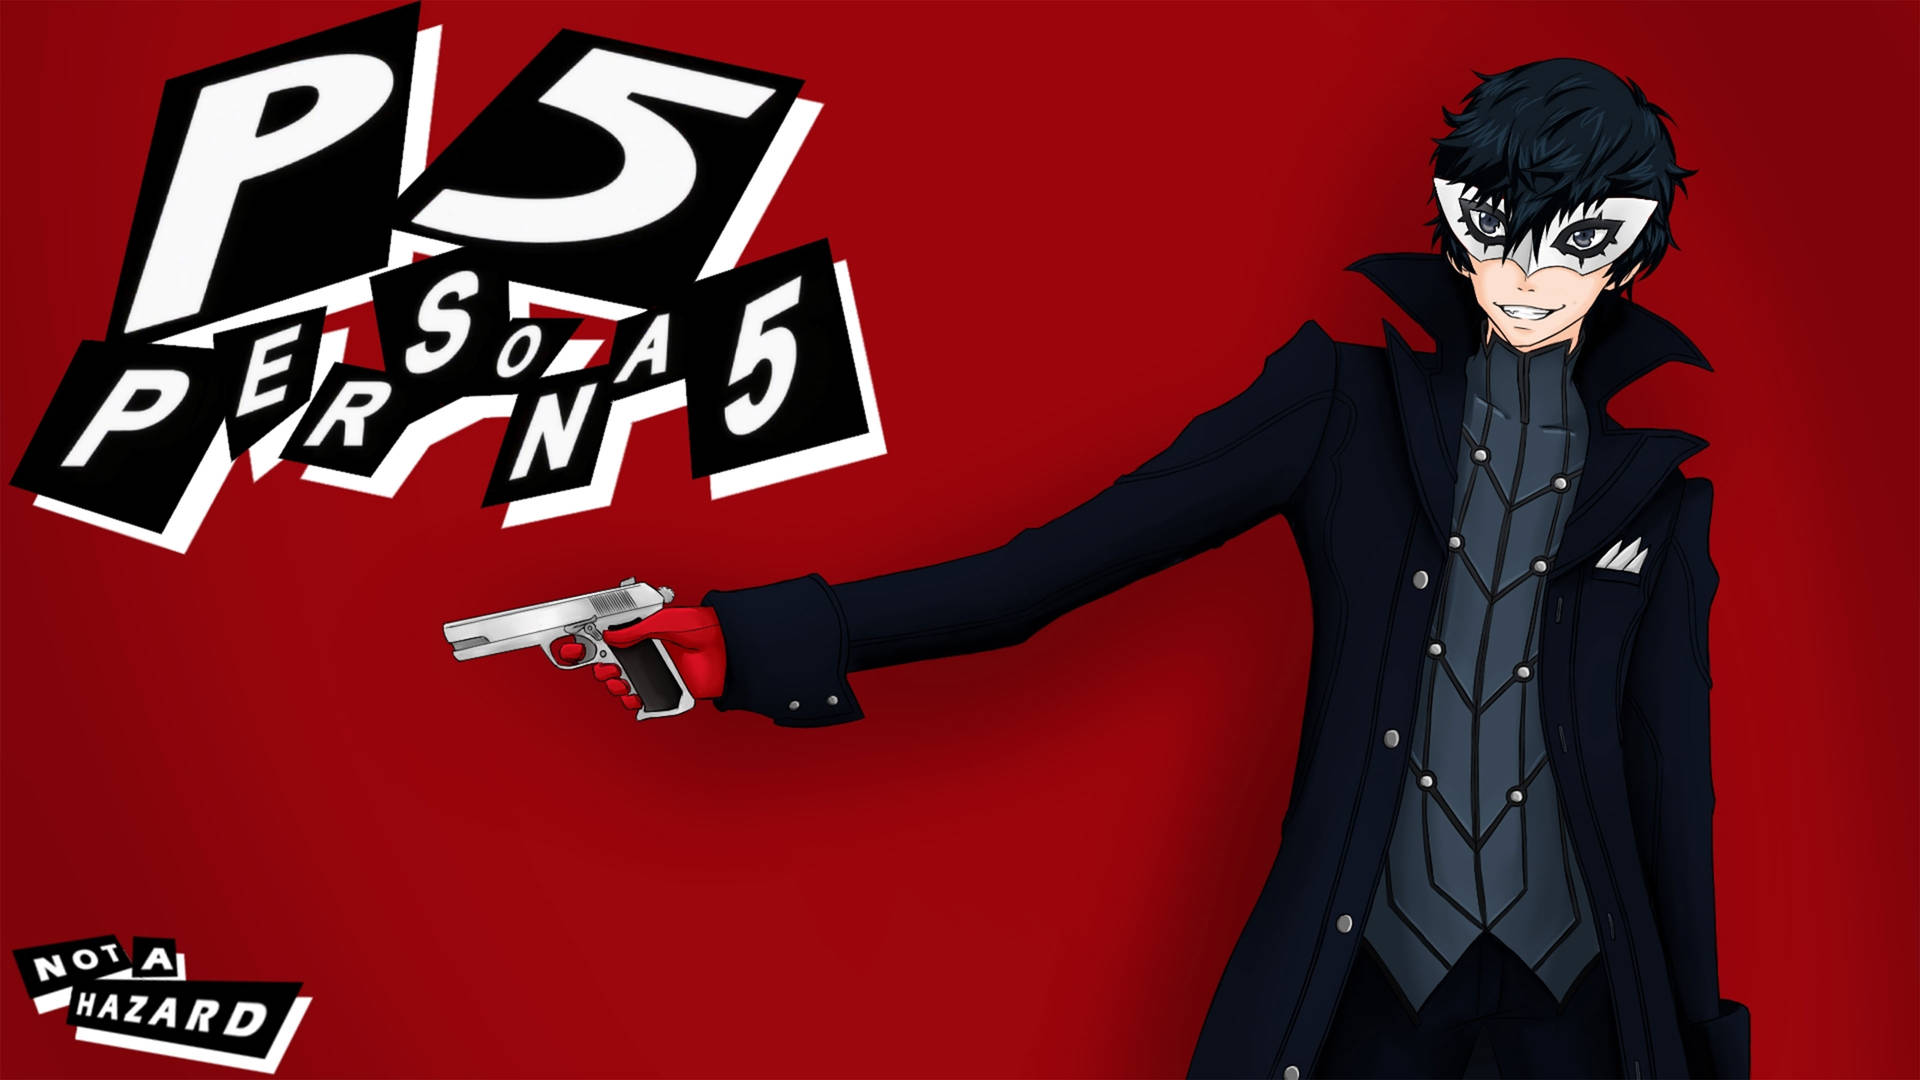 Persona5 4k Joker Pistol: Persona 5 (p5) Is A Popular Video Game That Features A Character Named Joker. This 4k Wallpaper Showcases Joker Holding A Pistol, Capturing The Intense And Exciting Atmosphere Of The Game. Fondo de pantalla